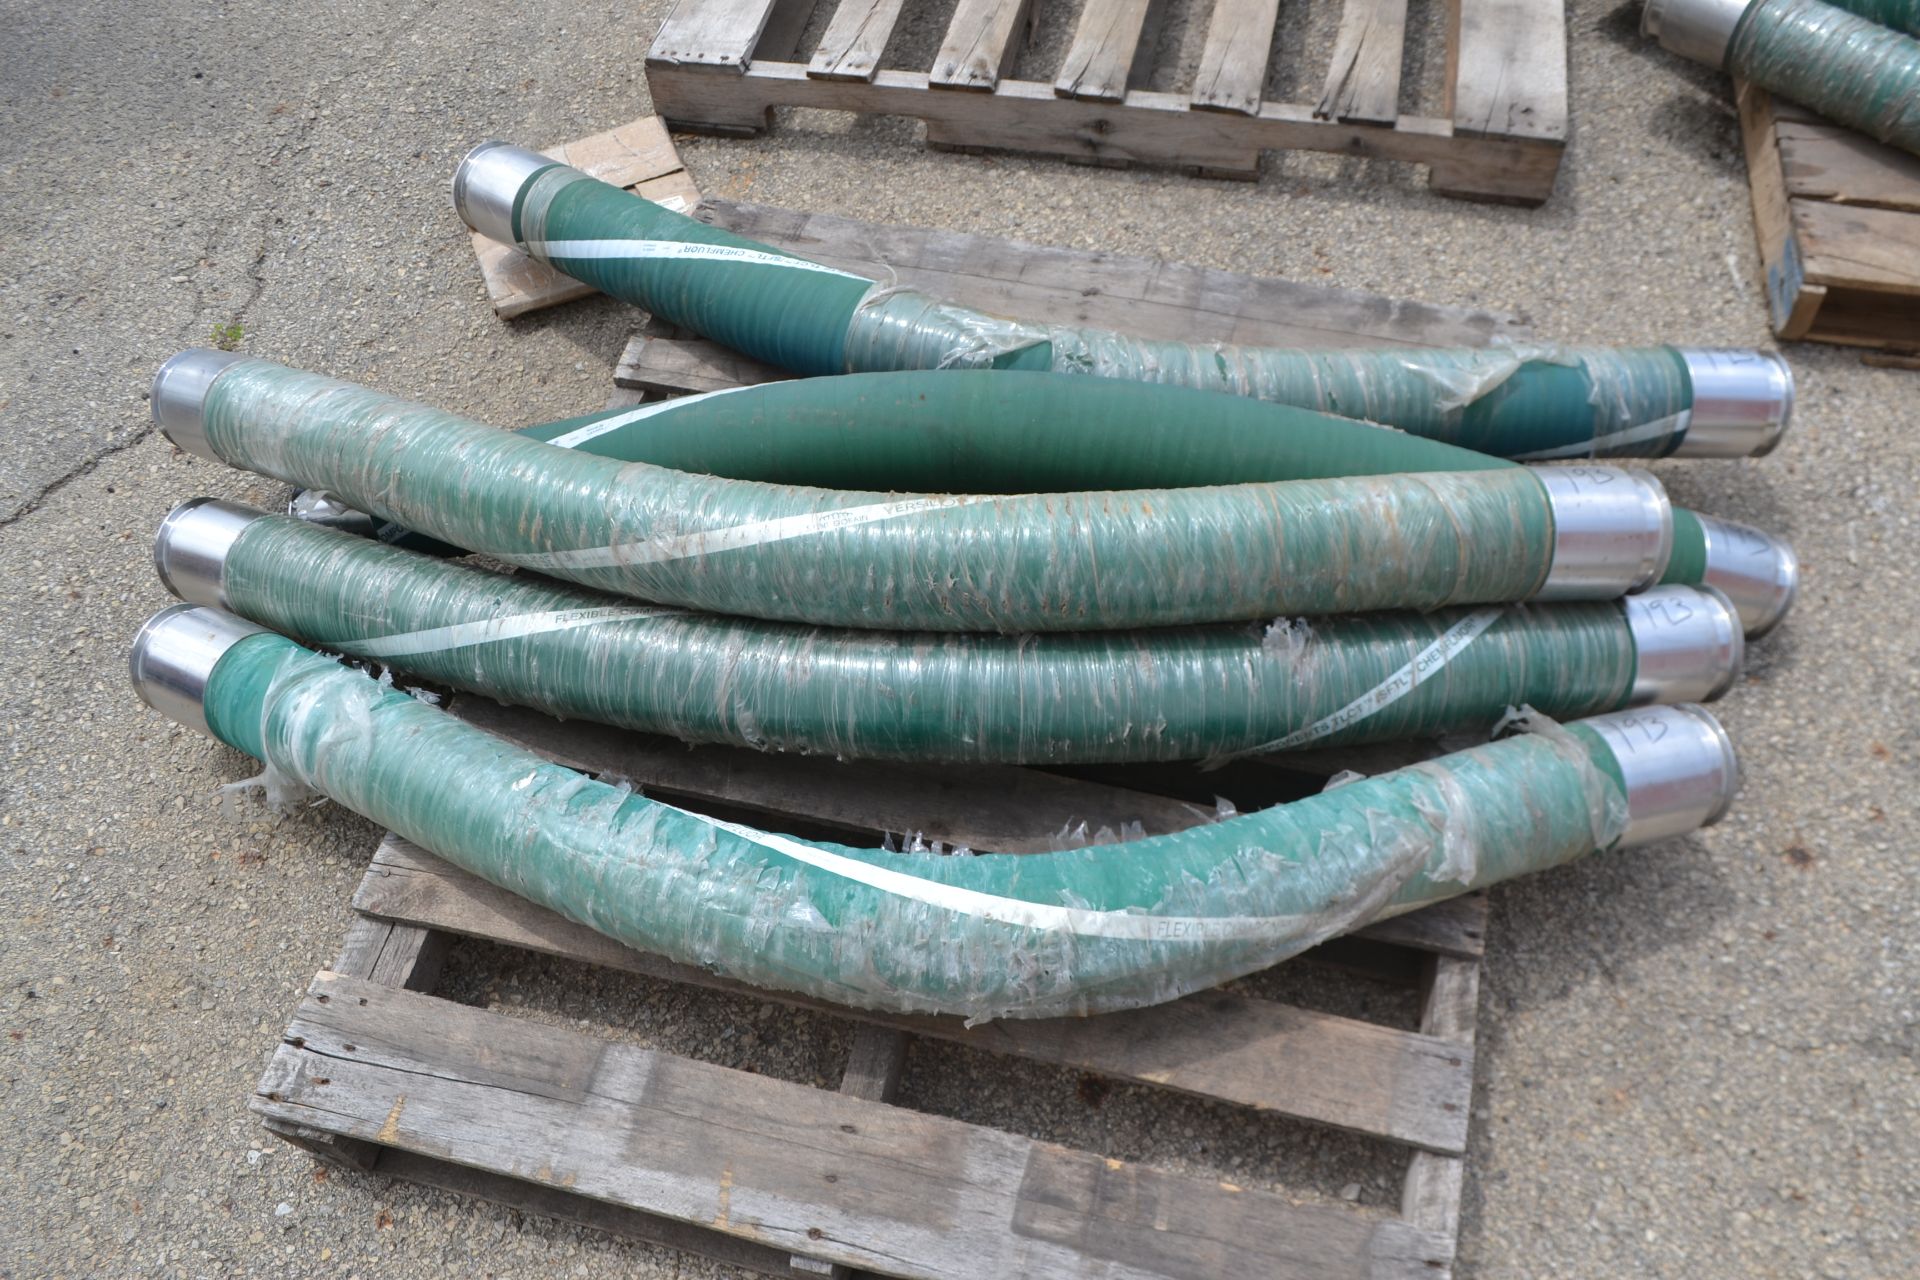 Lot of 5 ChemFluor Sanitary Hoses- 4" Clamp Ports Approx. 5'6"L Each.